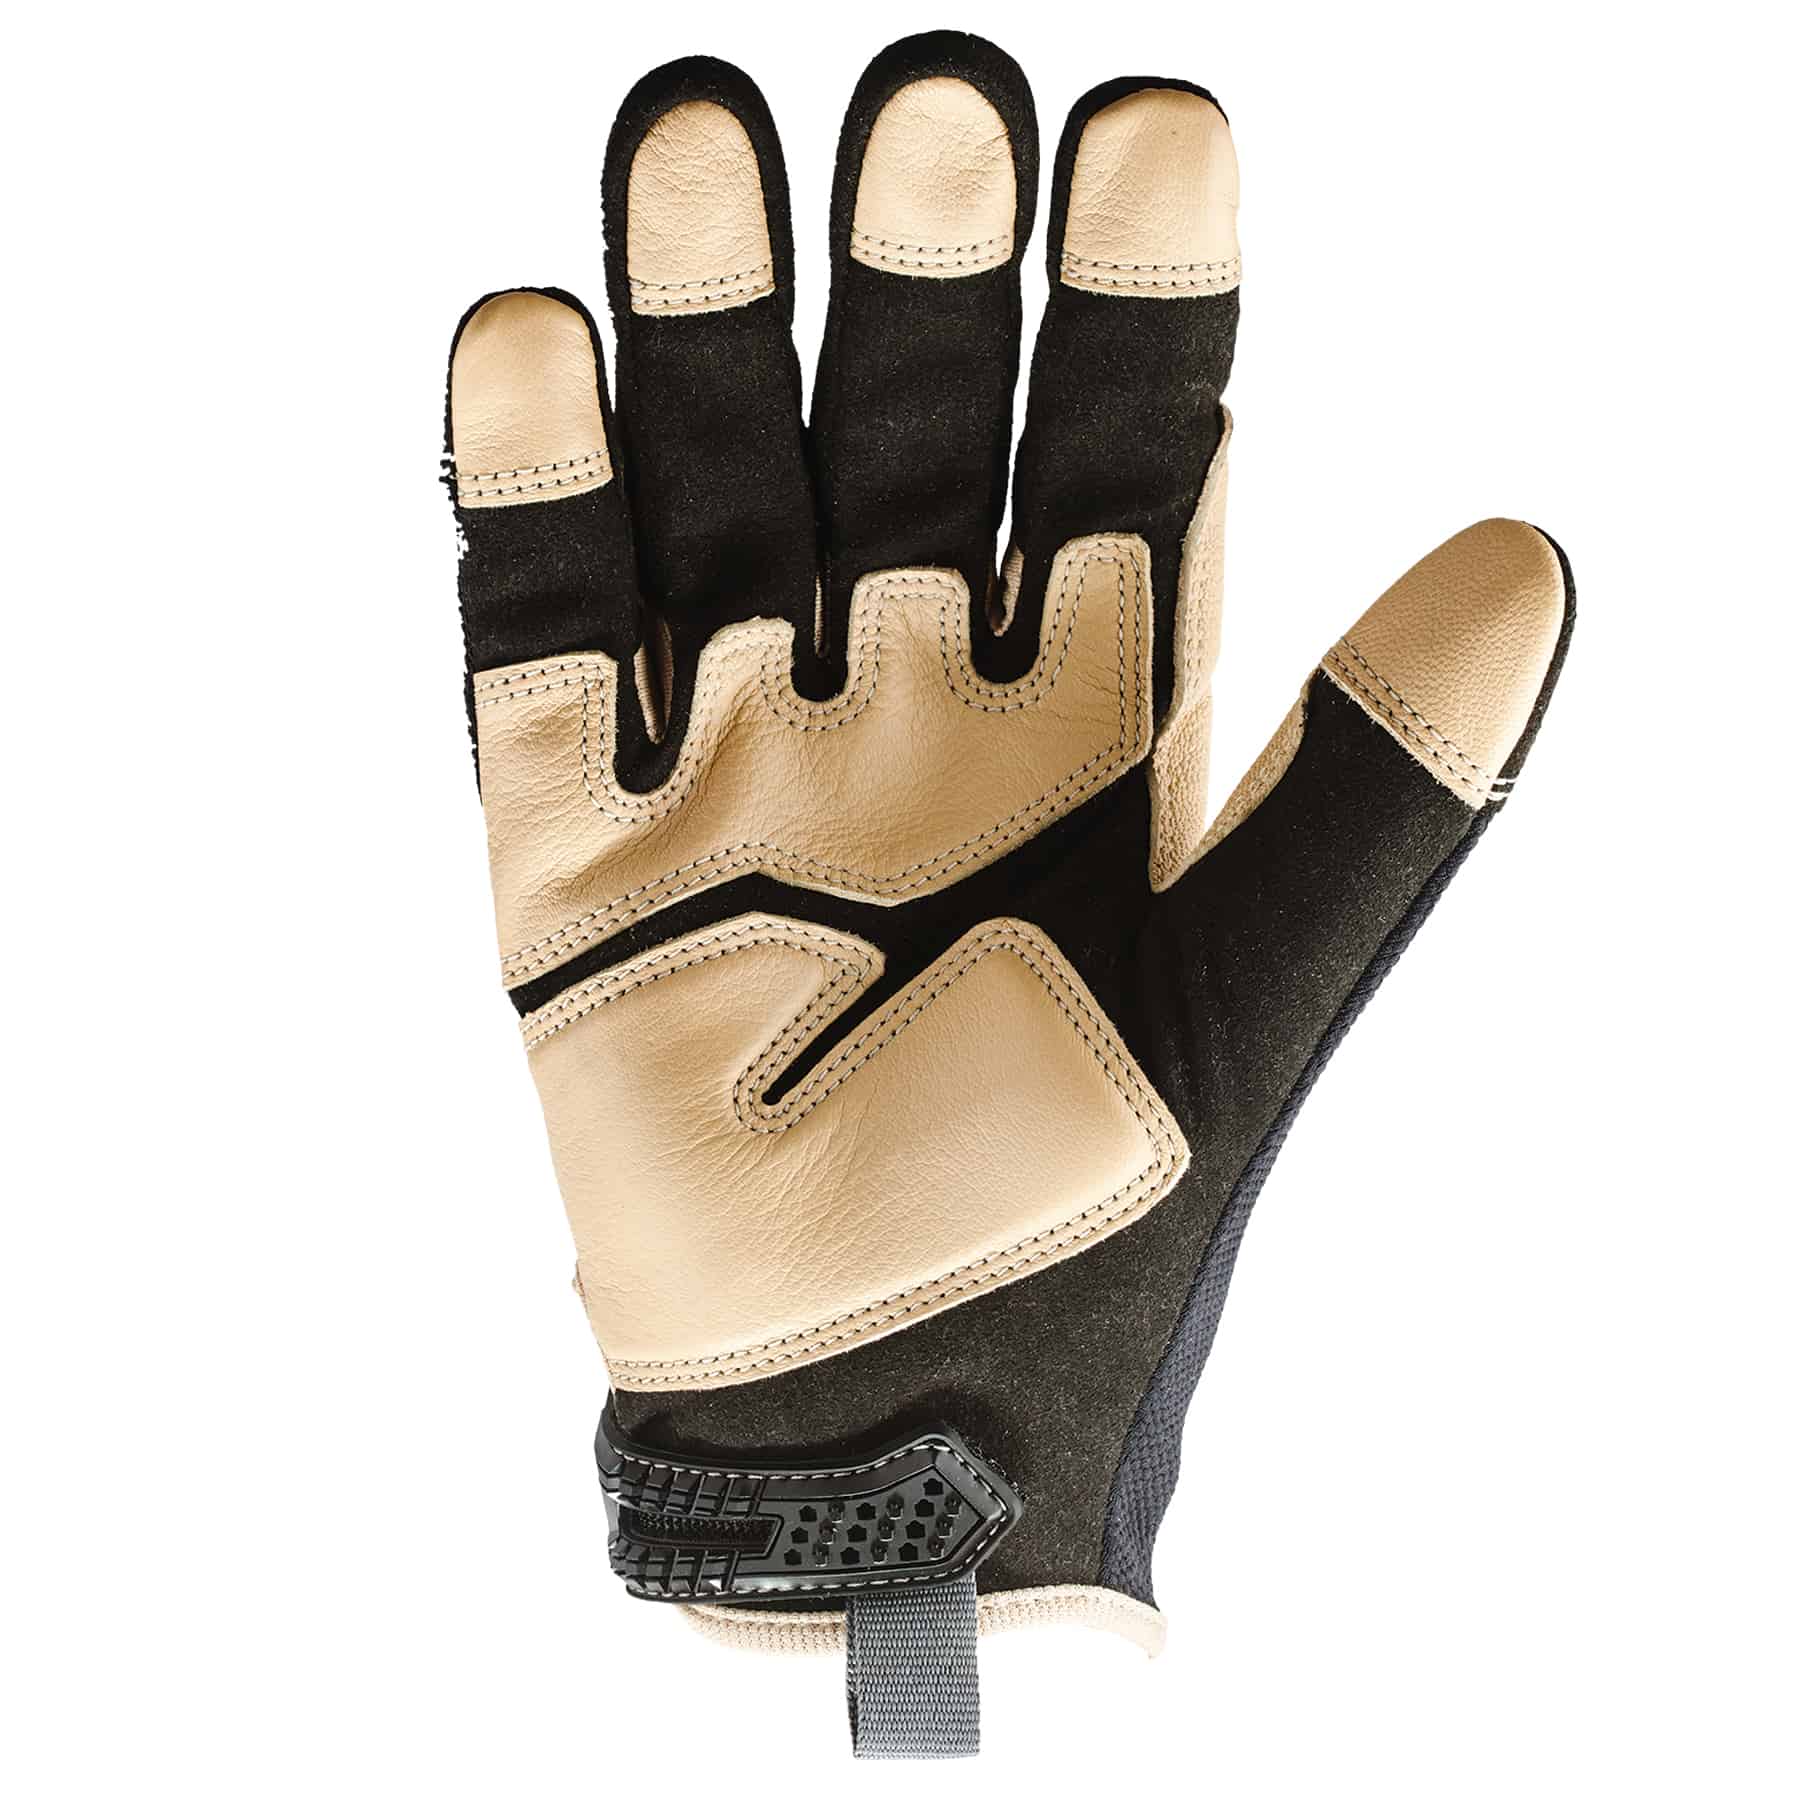 Gemplera S Premium Quality Durable Cowhide Leather Work Gloves Size Large with Keystone Thumb for High Dexterity Plus at MechanicSurplus.com 650L-L